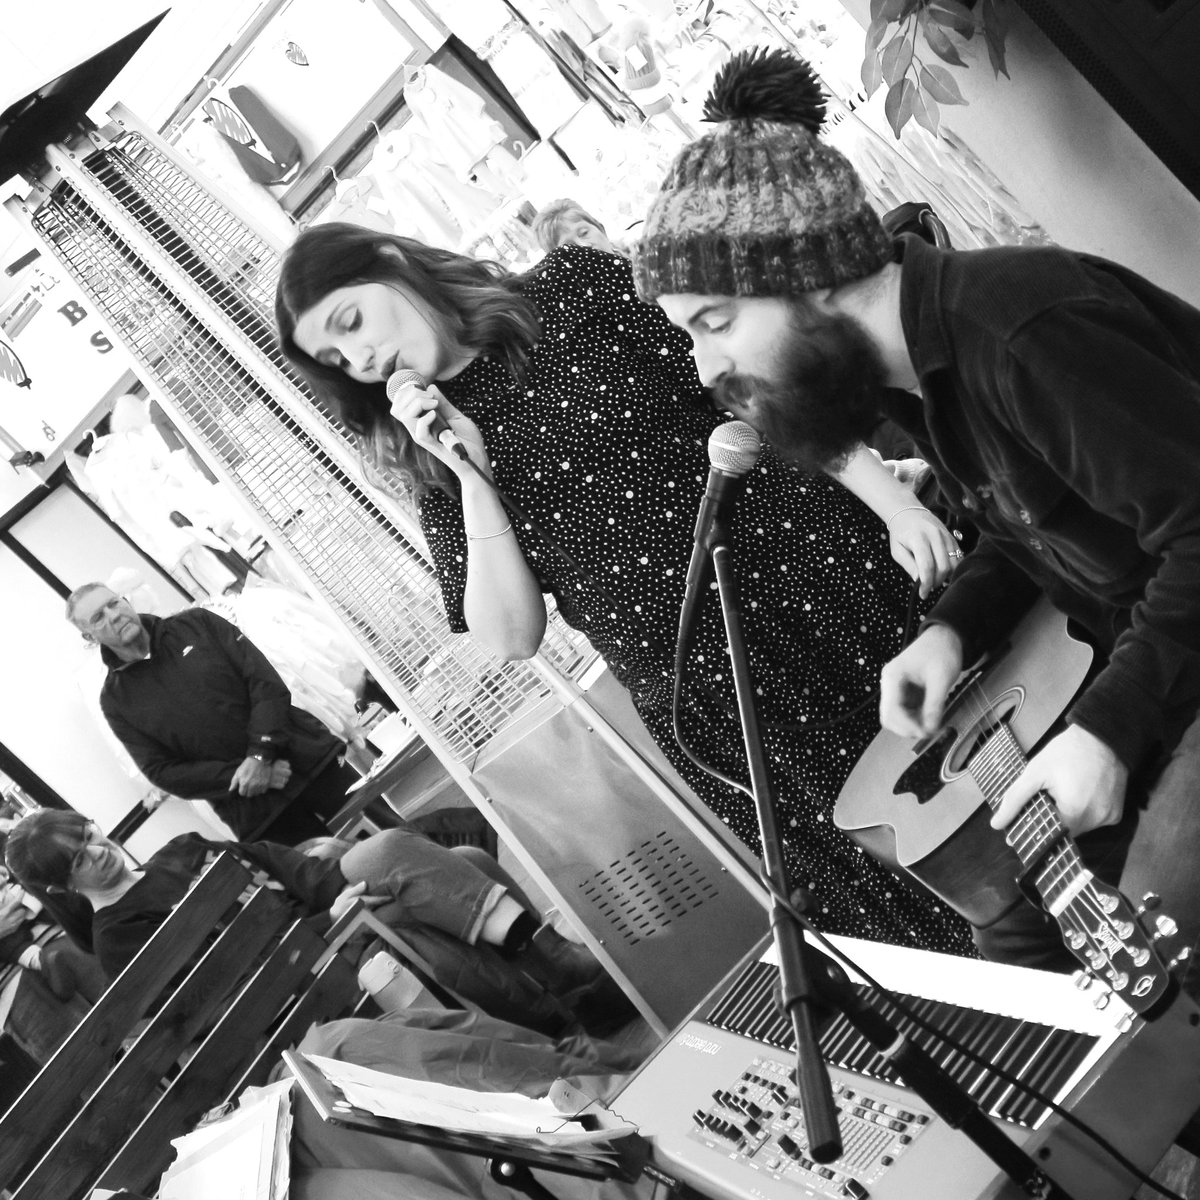 A shot from our matinee at @ponty_market for the @MuniPontypridd the week before last, courtesy of diagonal cameraman Gerhard Kress. We'll be back in the spring for more #MusicInTheMarket with @awen_wales!